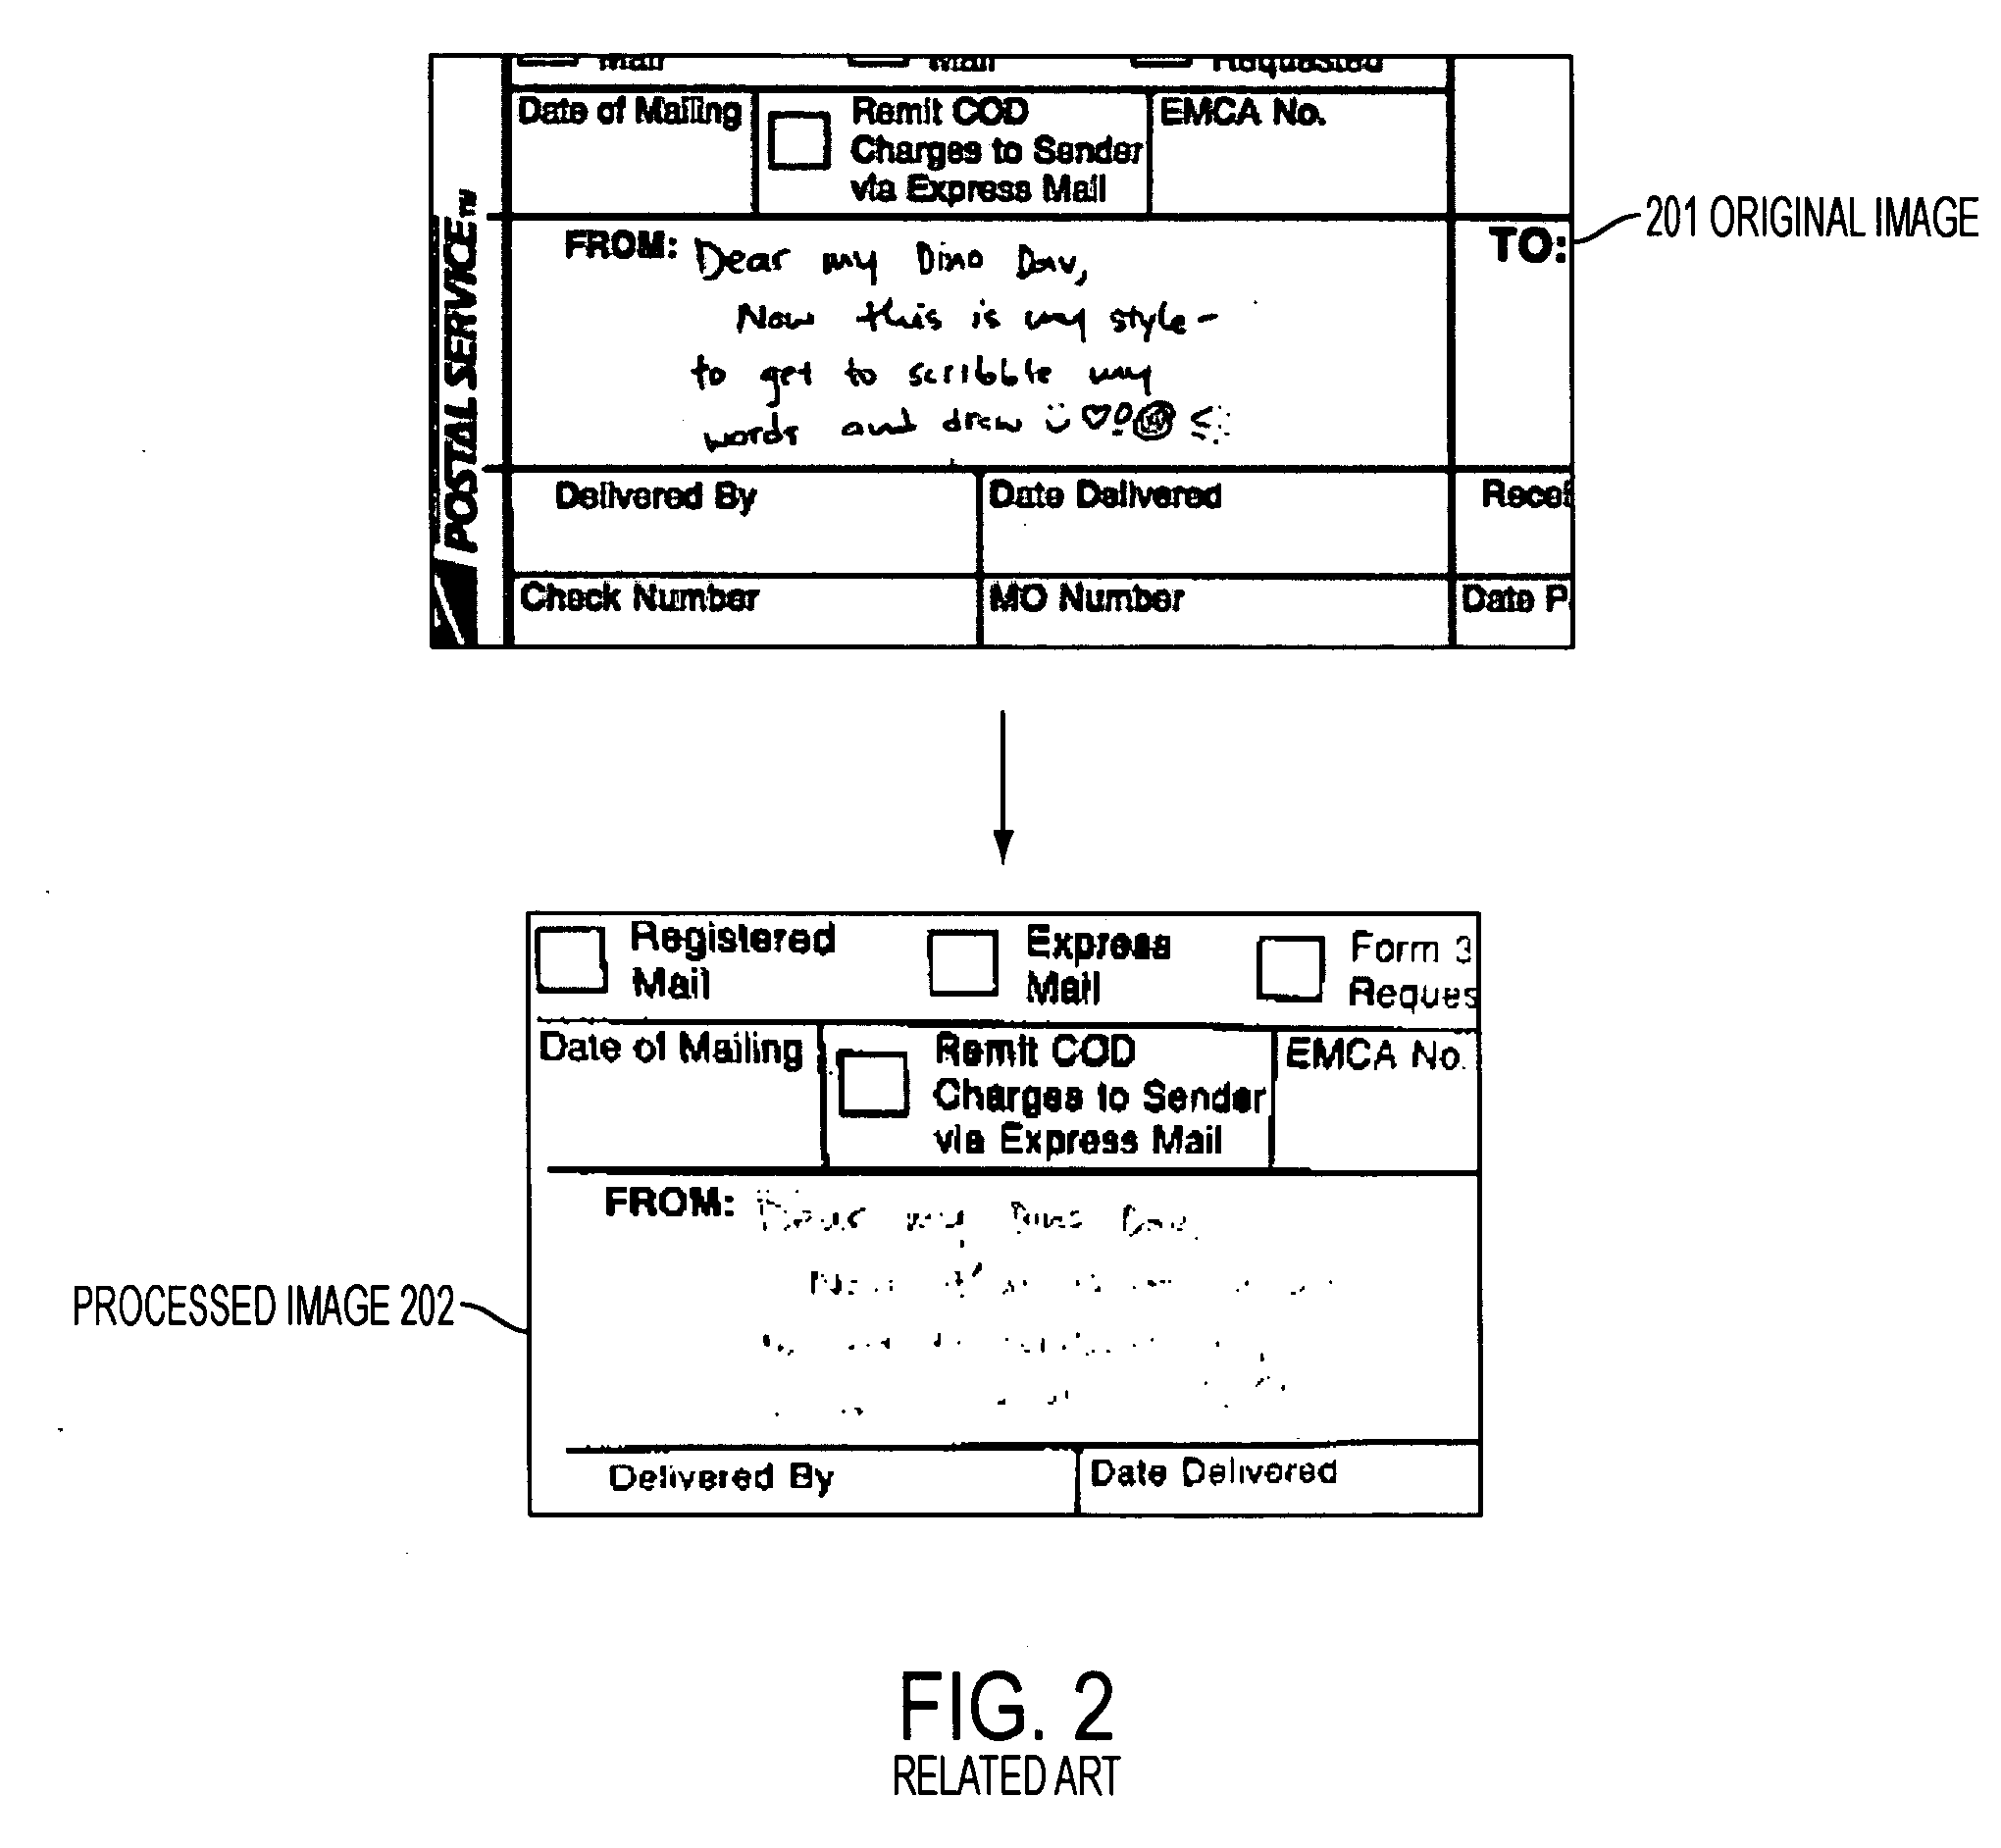 System and method of improving the legibility and applicability of document pictures using form based image enhancement